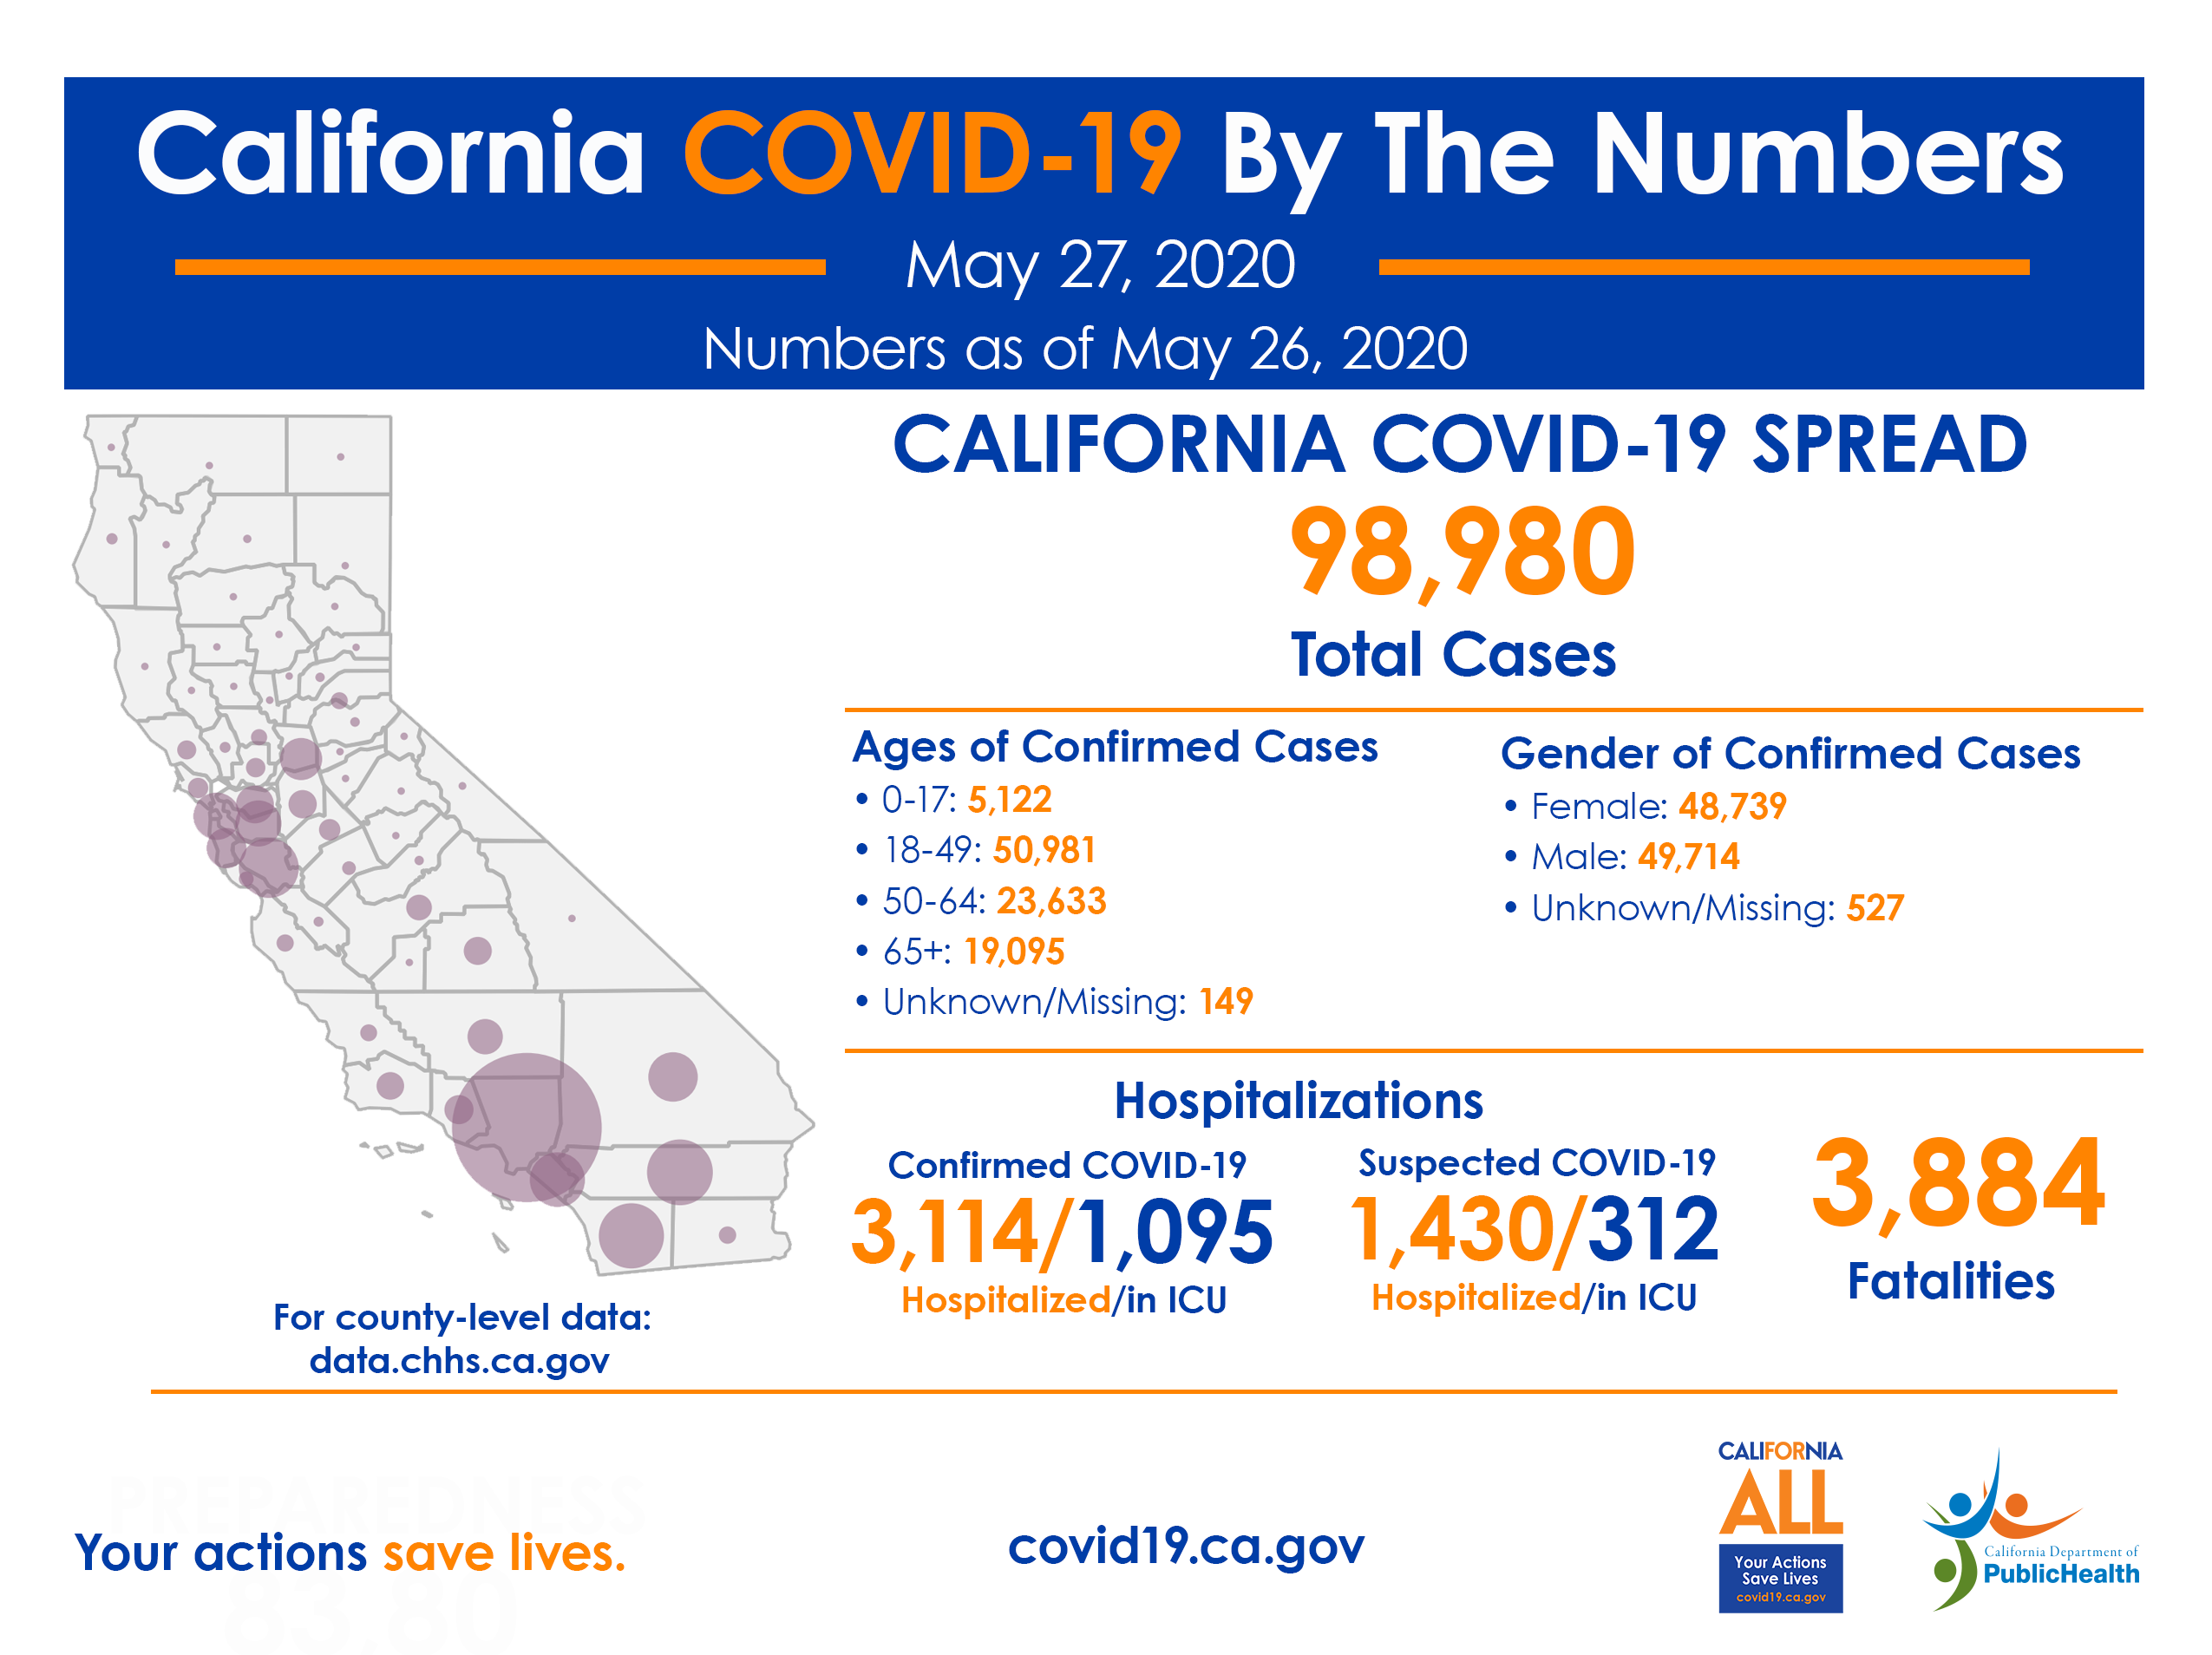 California COVID-19 by the Numbers as of May 26, 2020